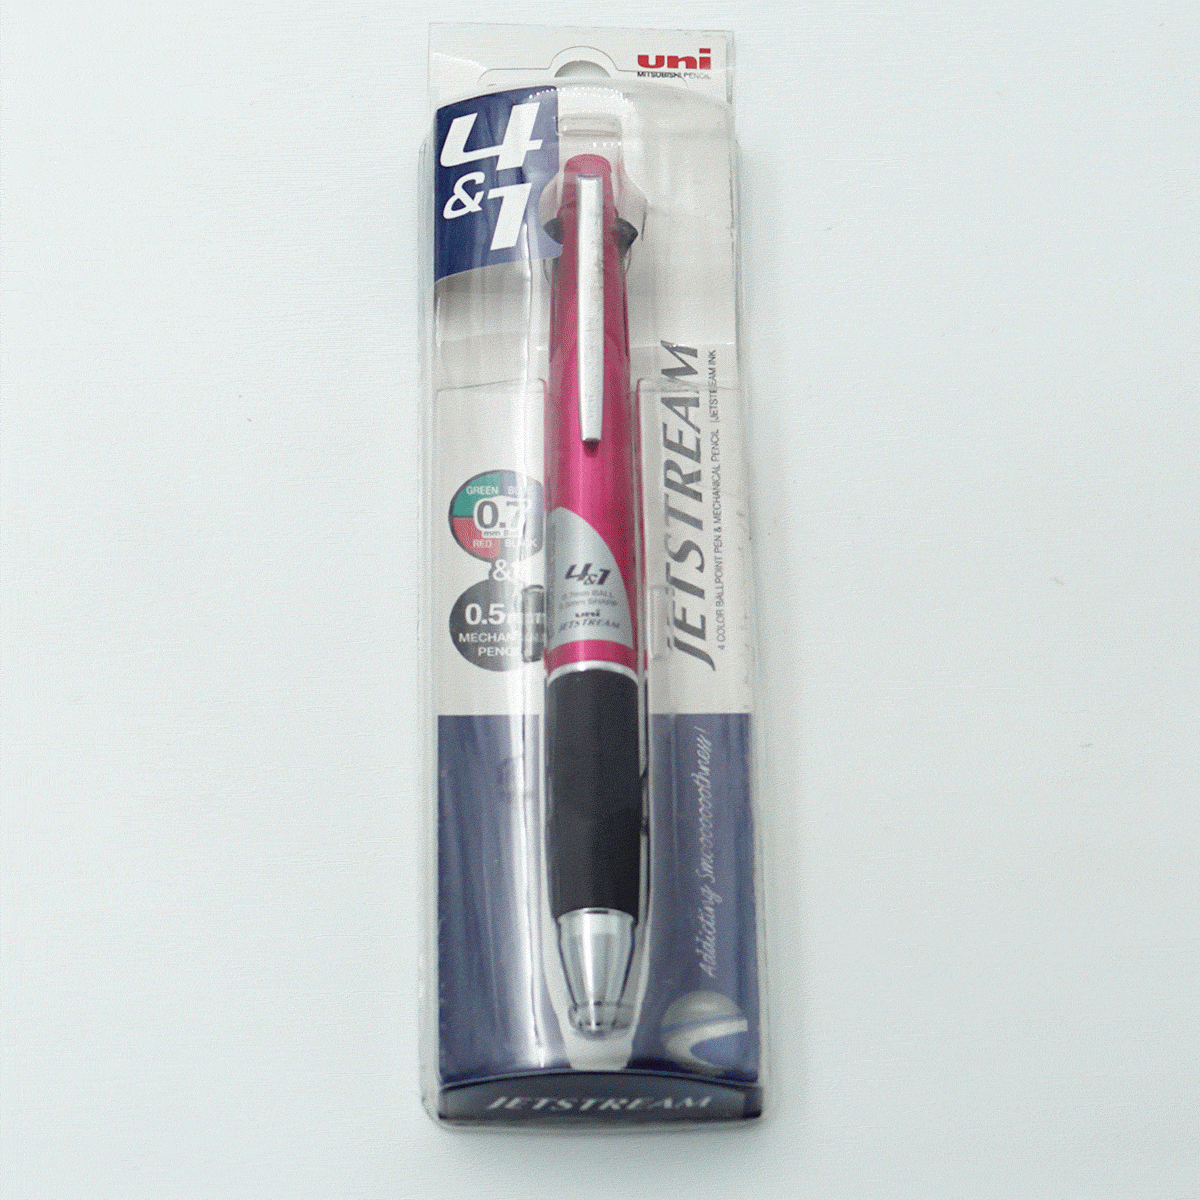 Uniball MSXE5-1000-07 Jetstream Pink Color Body With 4 Color 0.7mm Ballpoint Pen and 0.5mm Mechanical Pencil SKU 24313